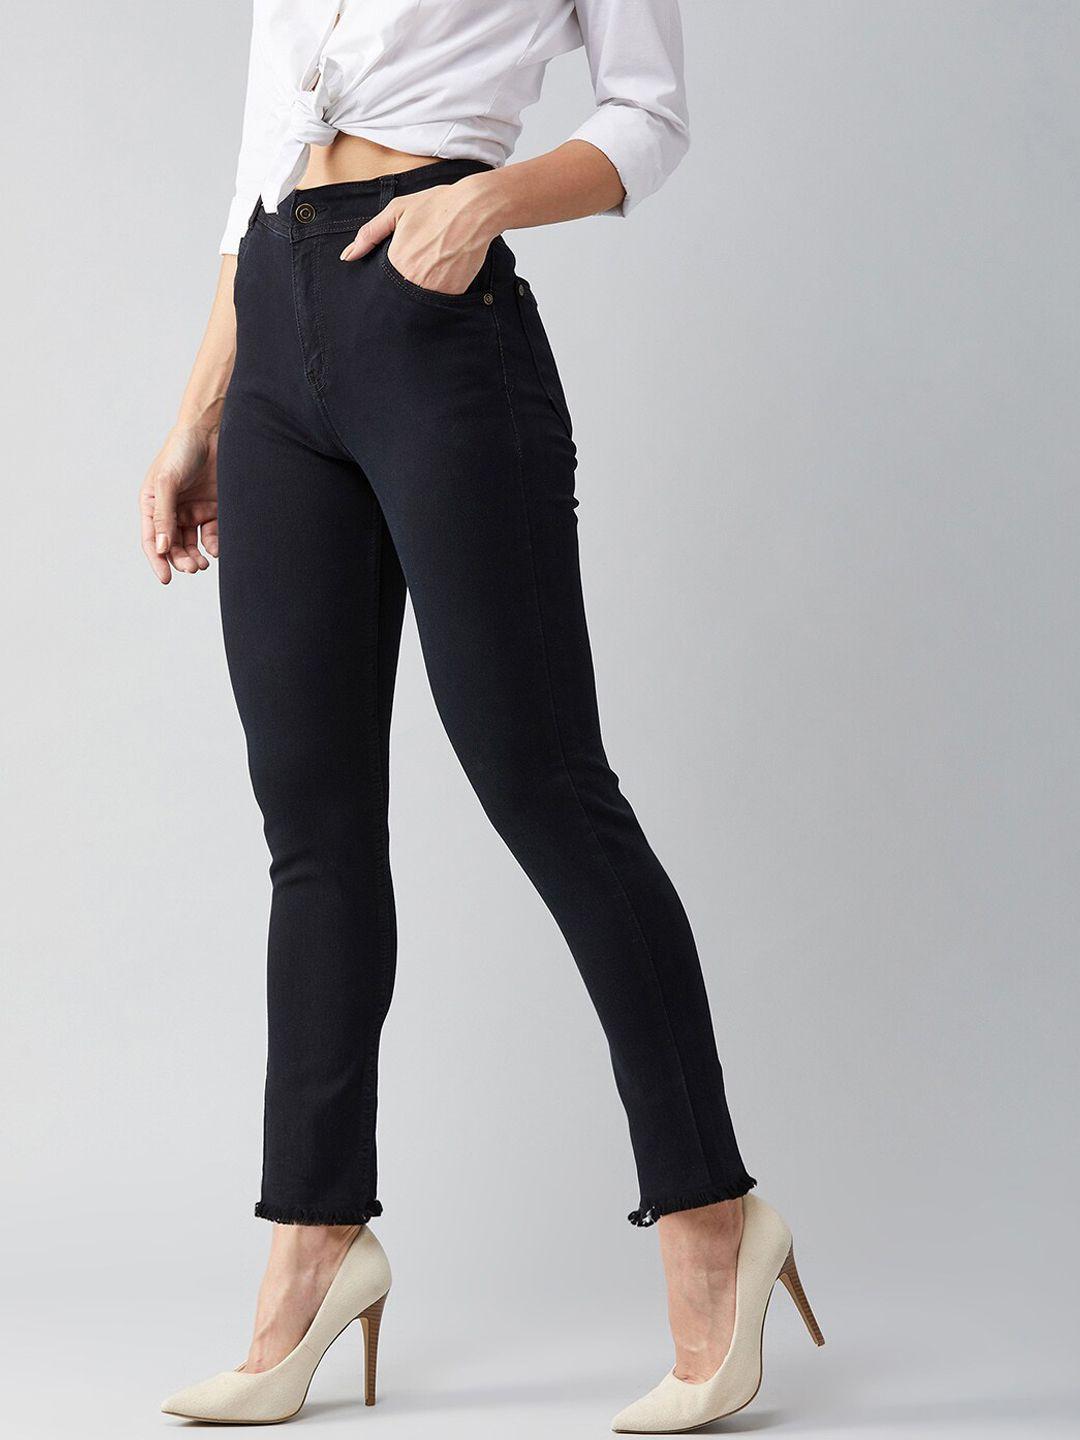 dolce crudo women black slim fit high-rise stretchable jeans